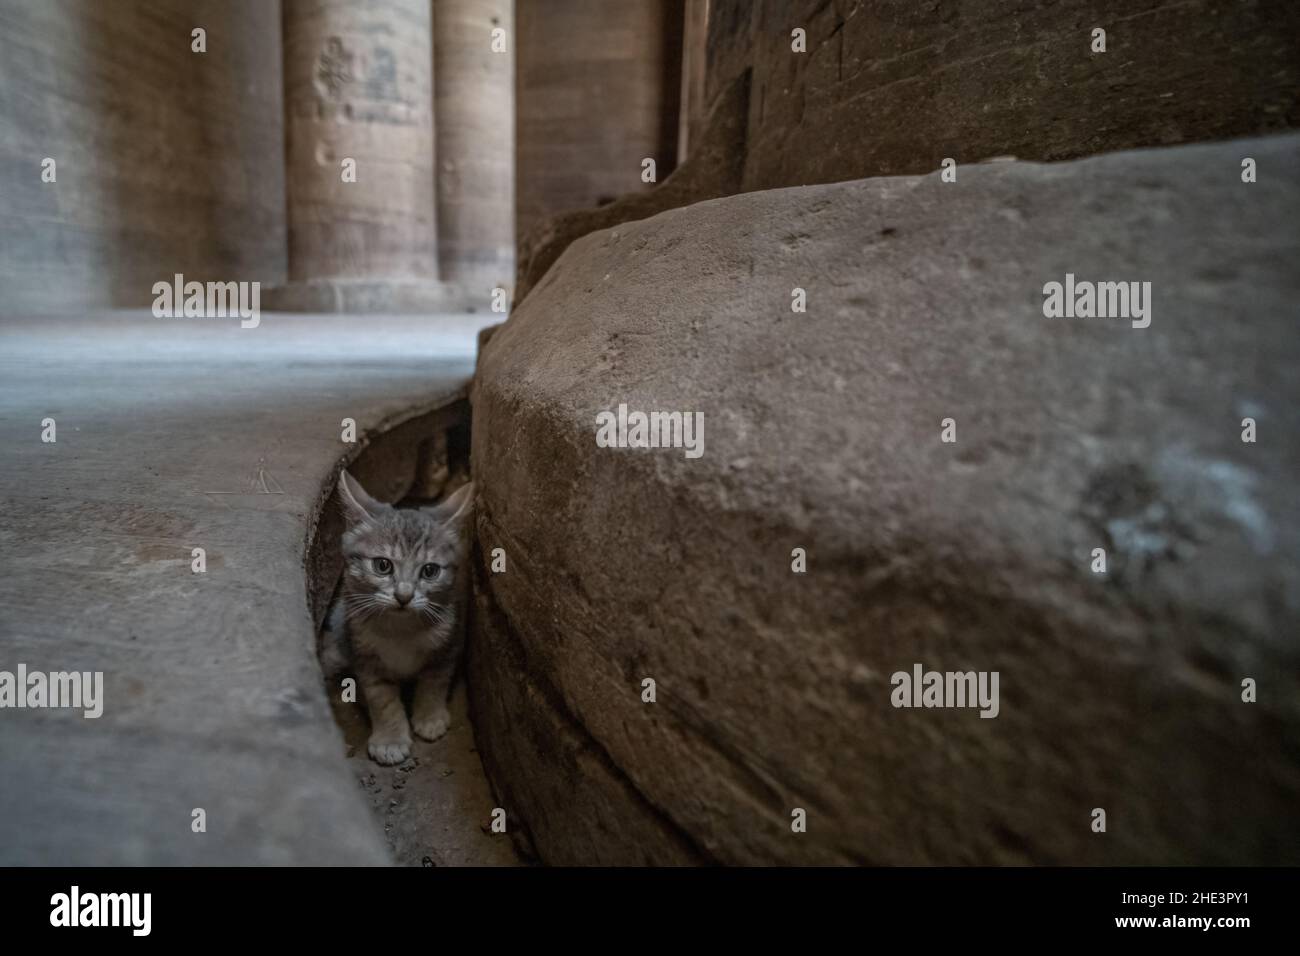 A cute kitten hides near an ancient stone column in the vestibule of the temple of Philae in Aswan, Egypt. Stock Photo